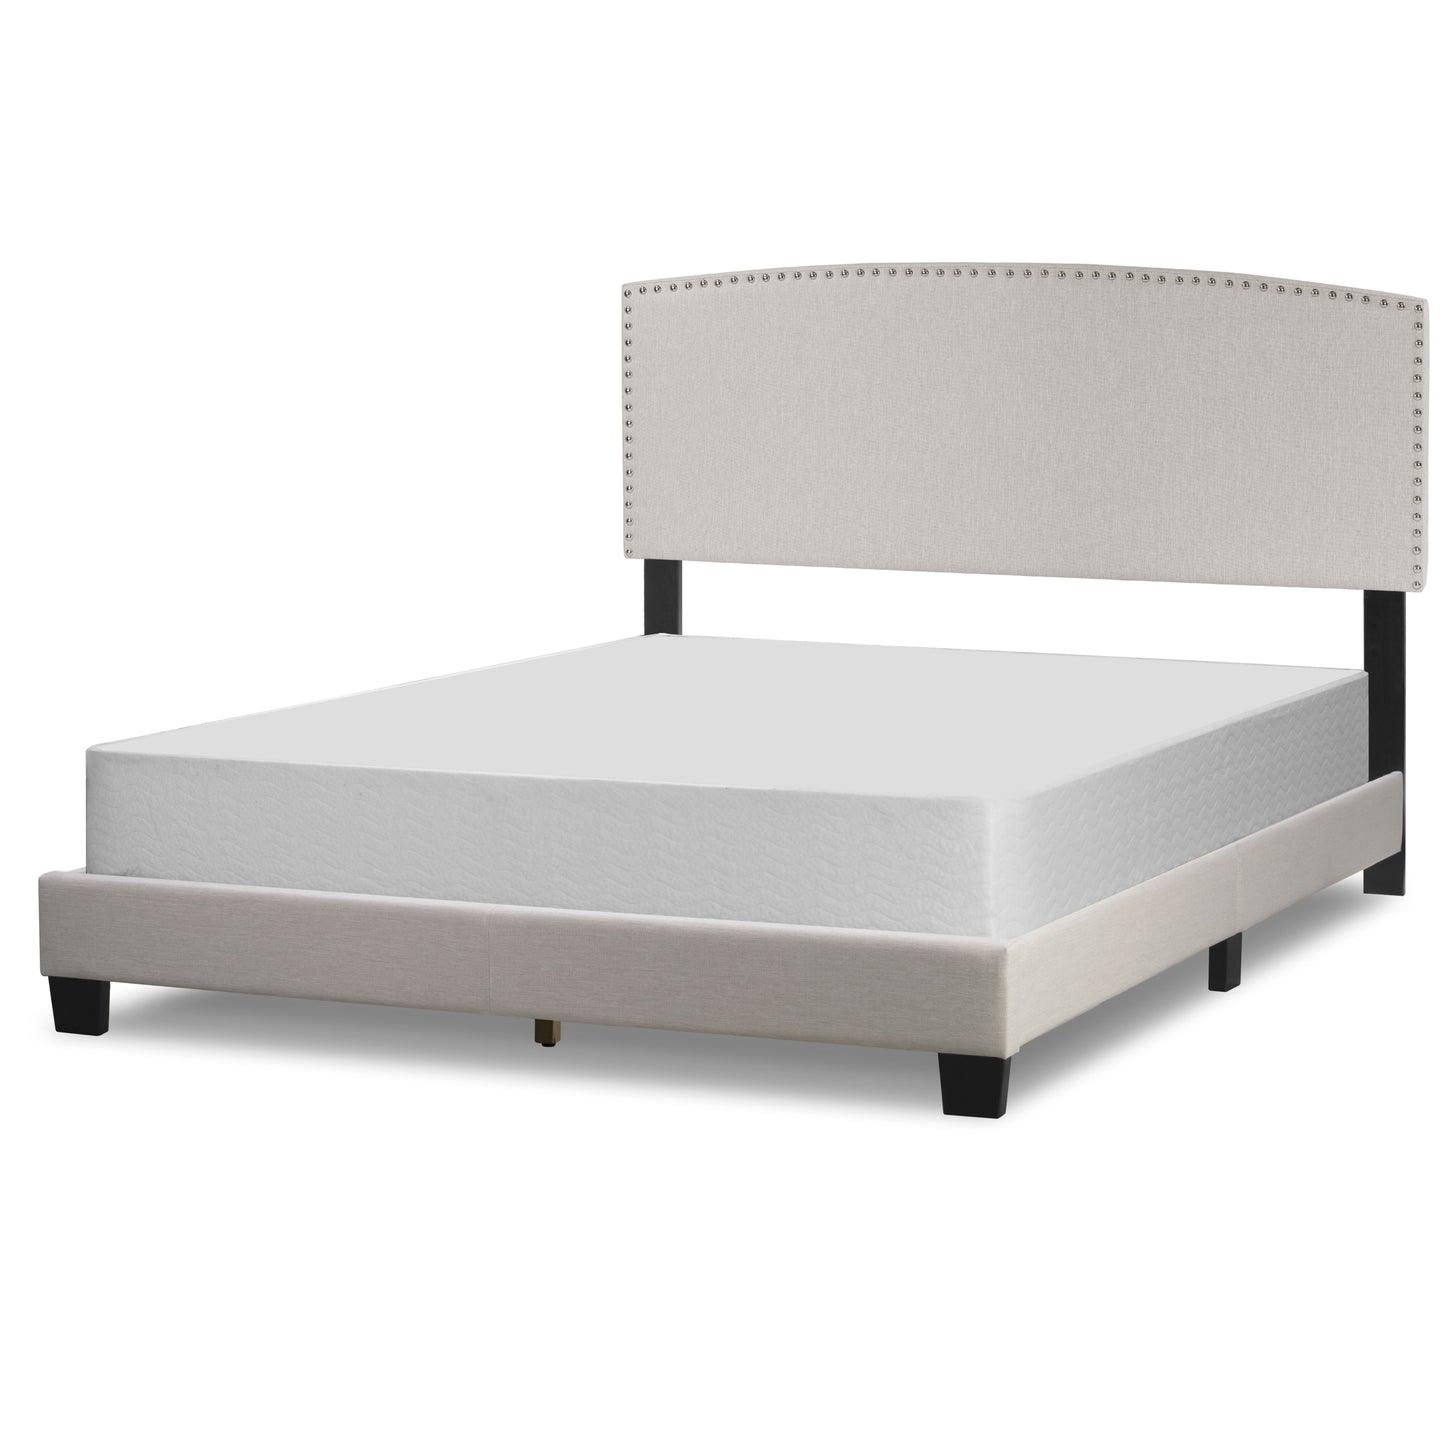 Ausca Beige Fabric Queen Bed with Nail Head Trim